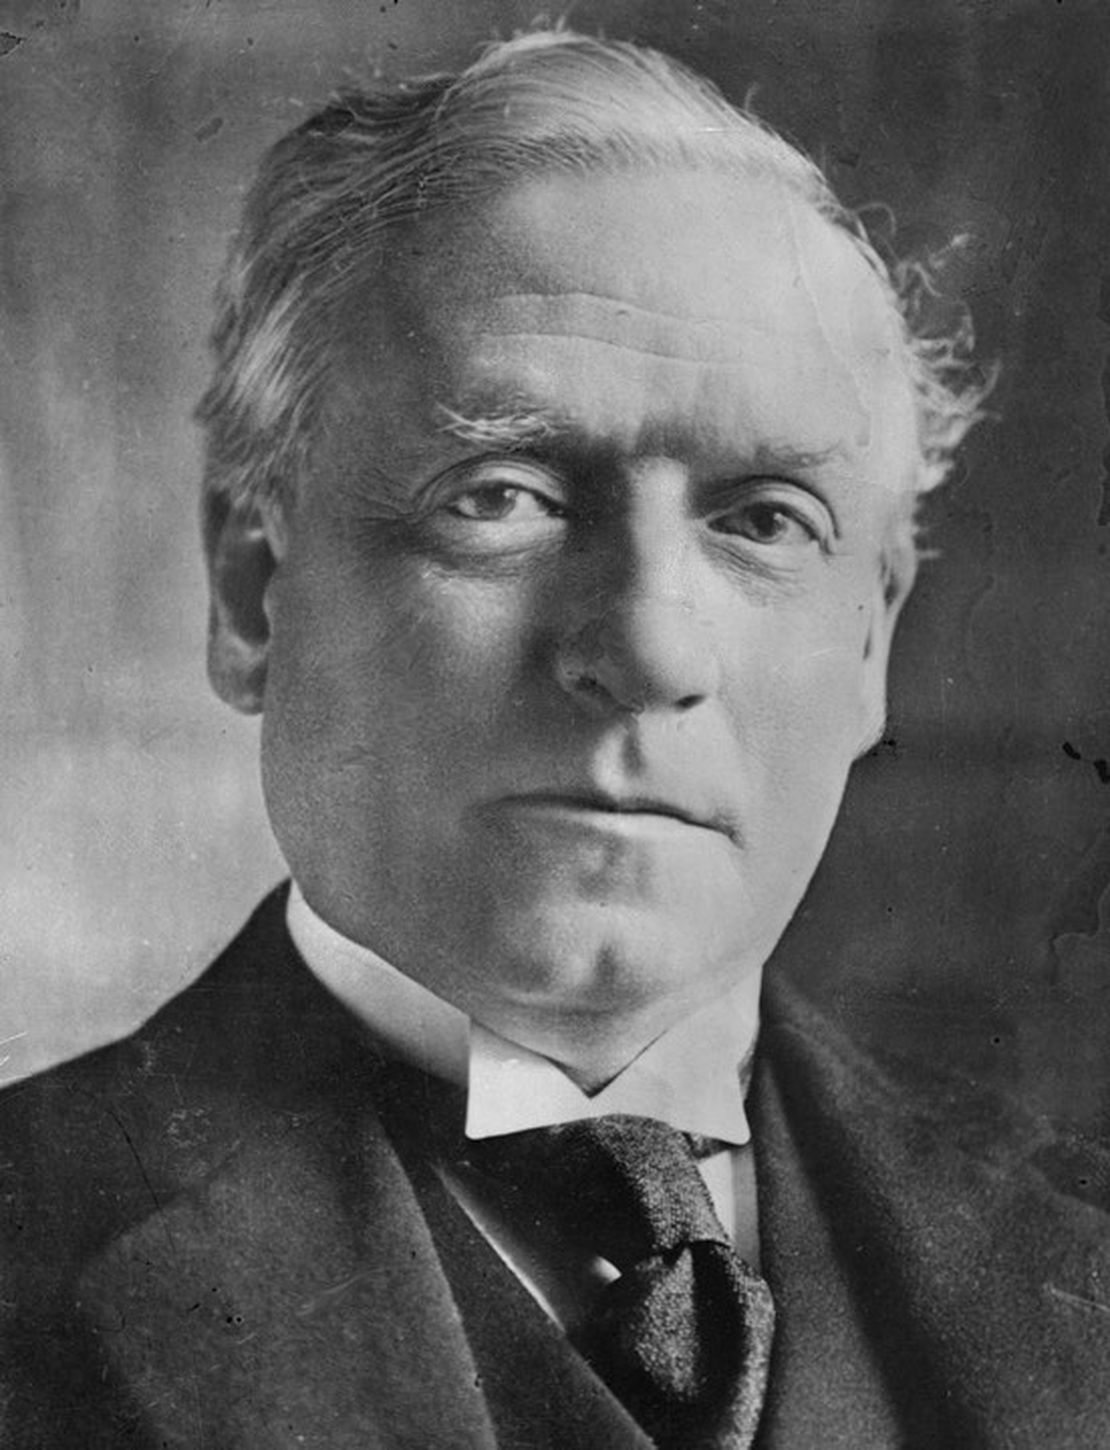 Prime Minister Asquith offers a compromise on Home Rule electors in the North